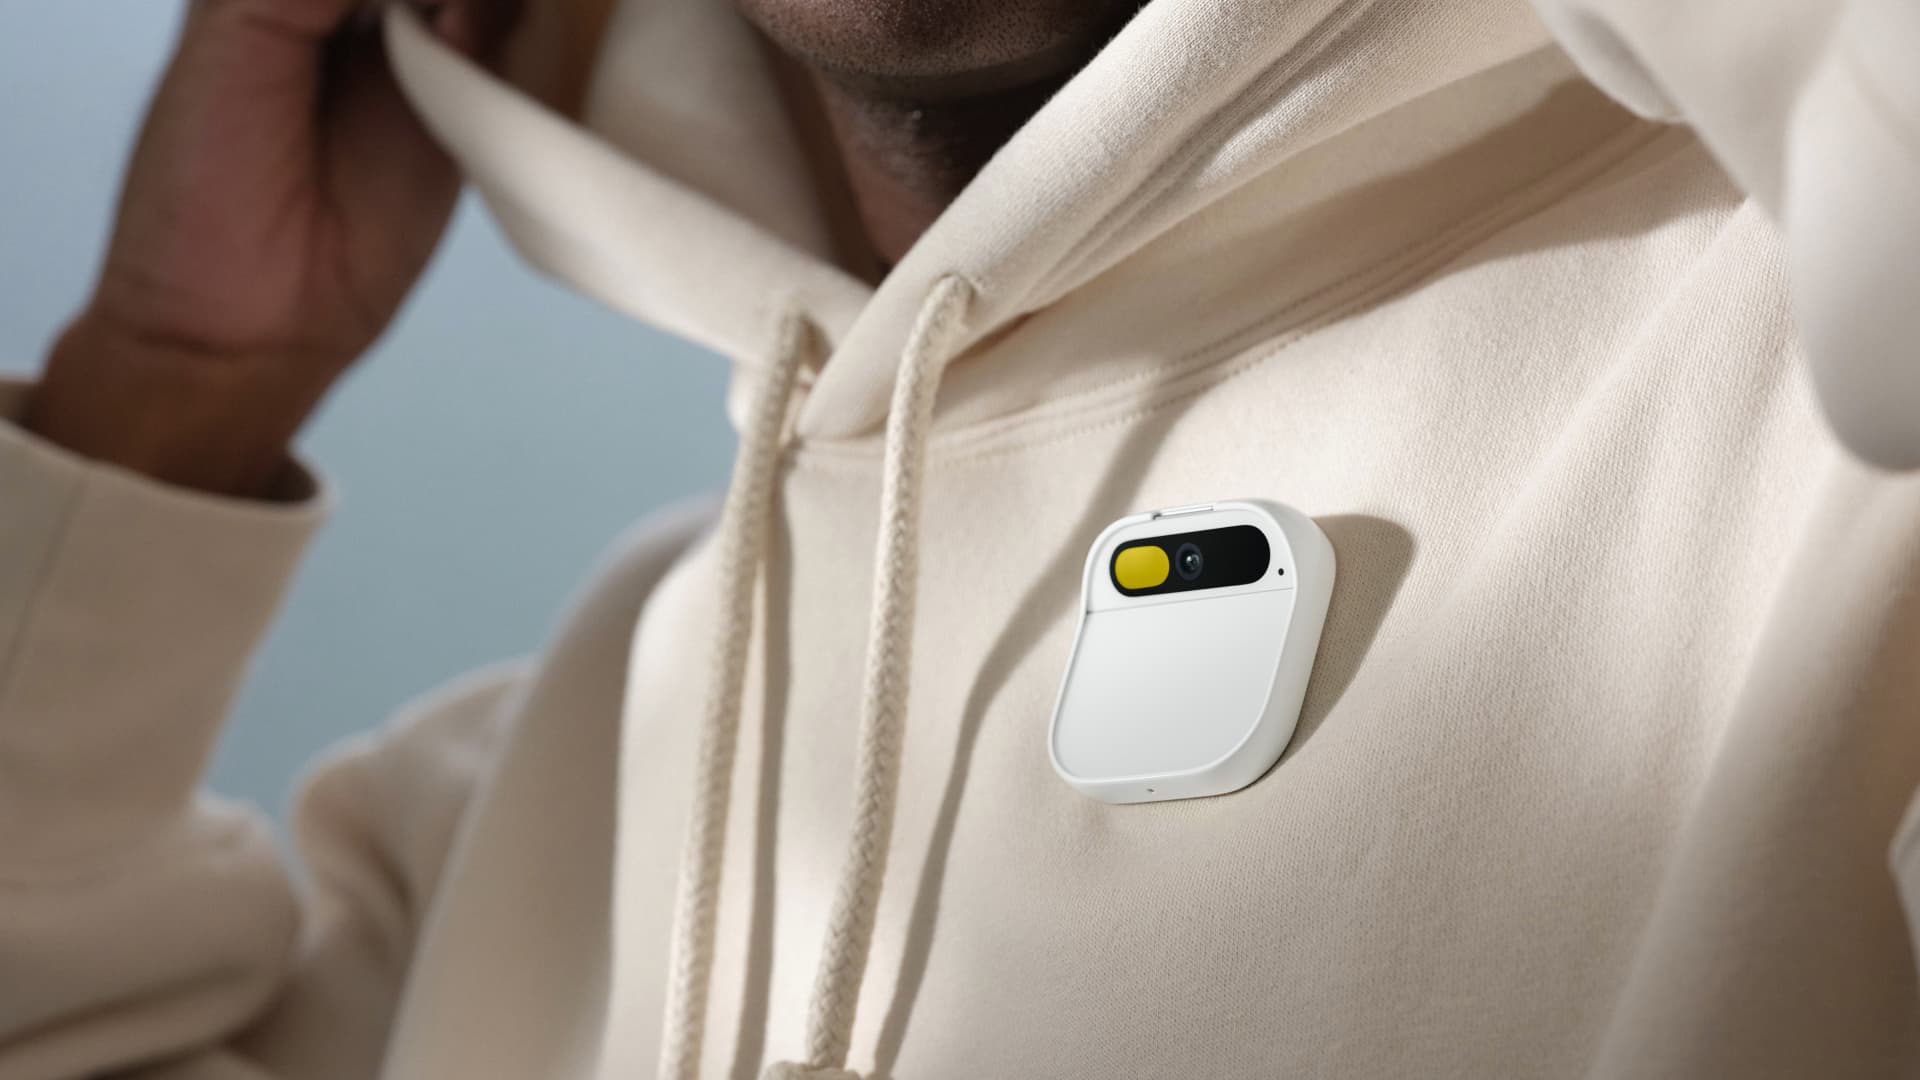 Former Apple designers at Humane launch hands-free AI-powered pin